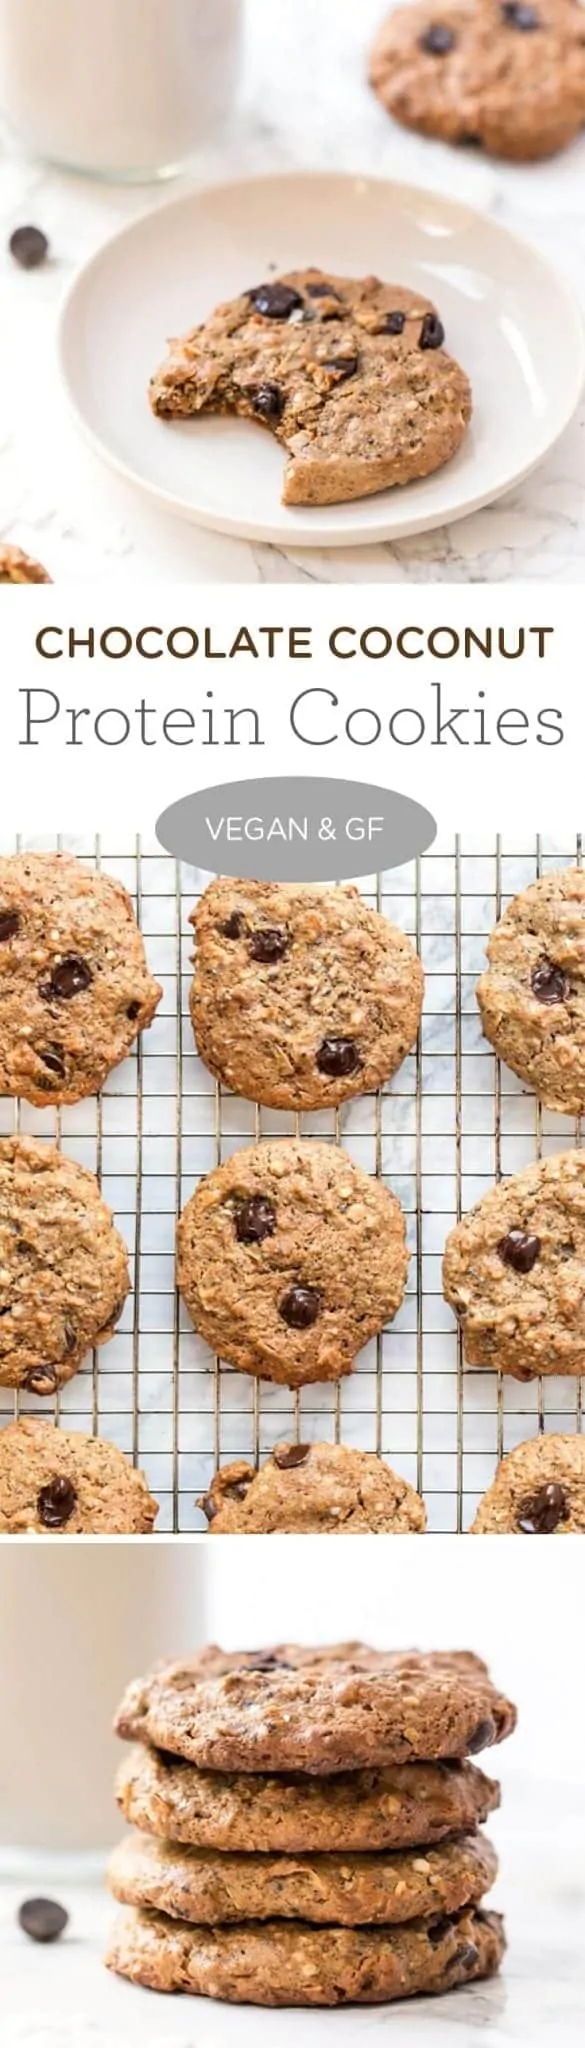 healthy chocolate protein cookies with coconut